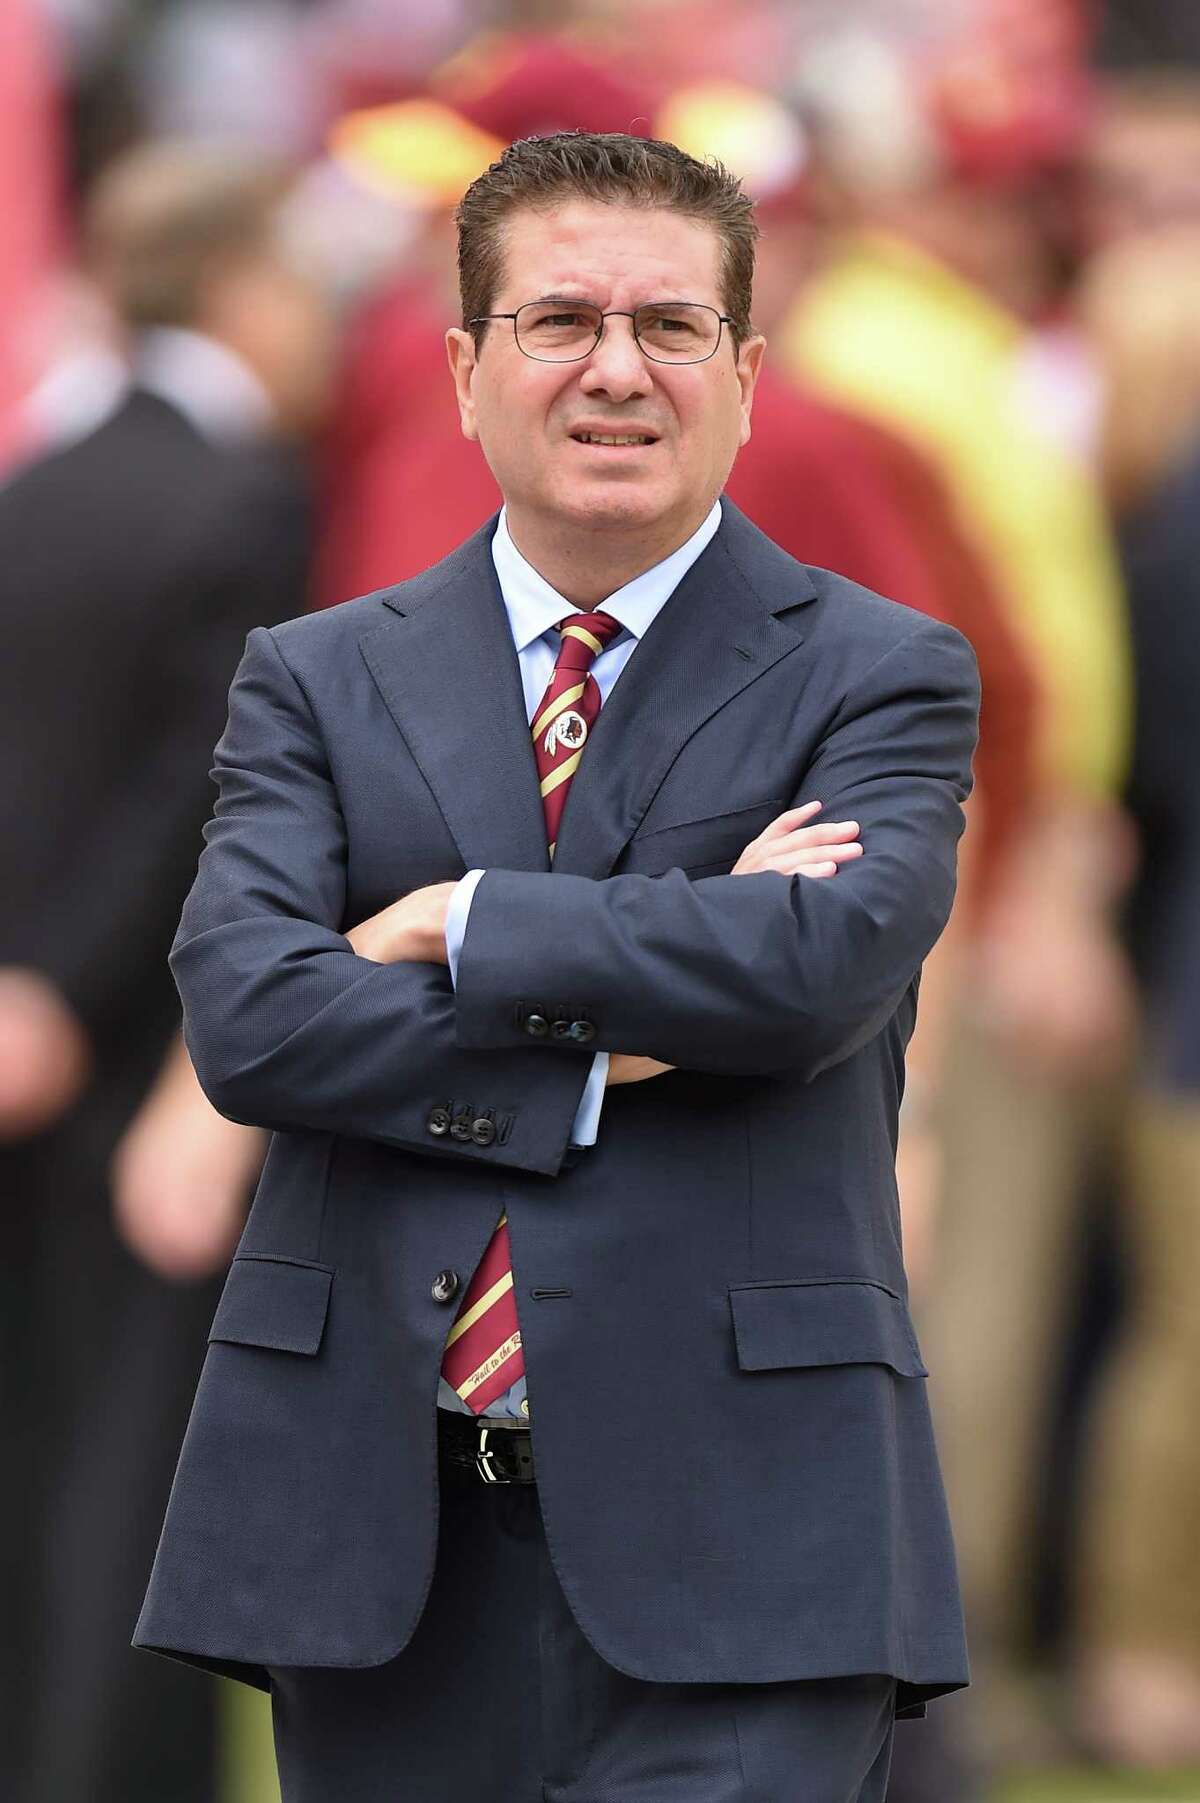 LANDOVER, MD - OCTOBER 2: Washington Redskins owner Dan Snyder looks on prior to a game against the Cleveland Browns at FedExField on October 2, 2016 in Landover, Maryland. (Photo by Mitchell Layton/Getty Images) ORG XMIT: 659523061